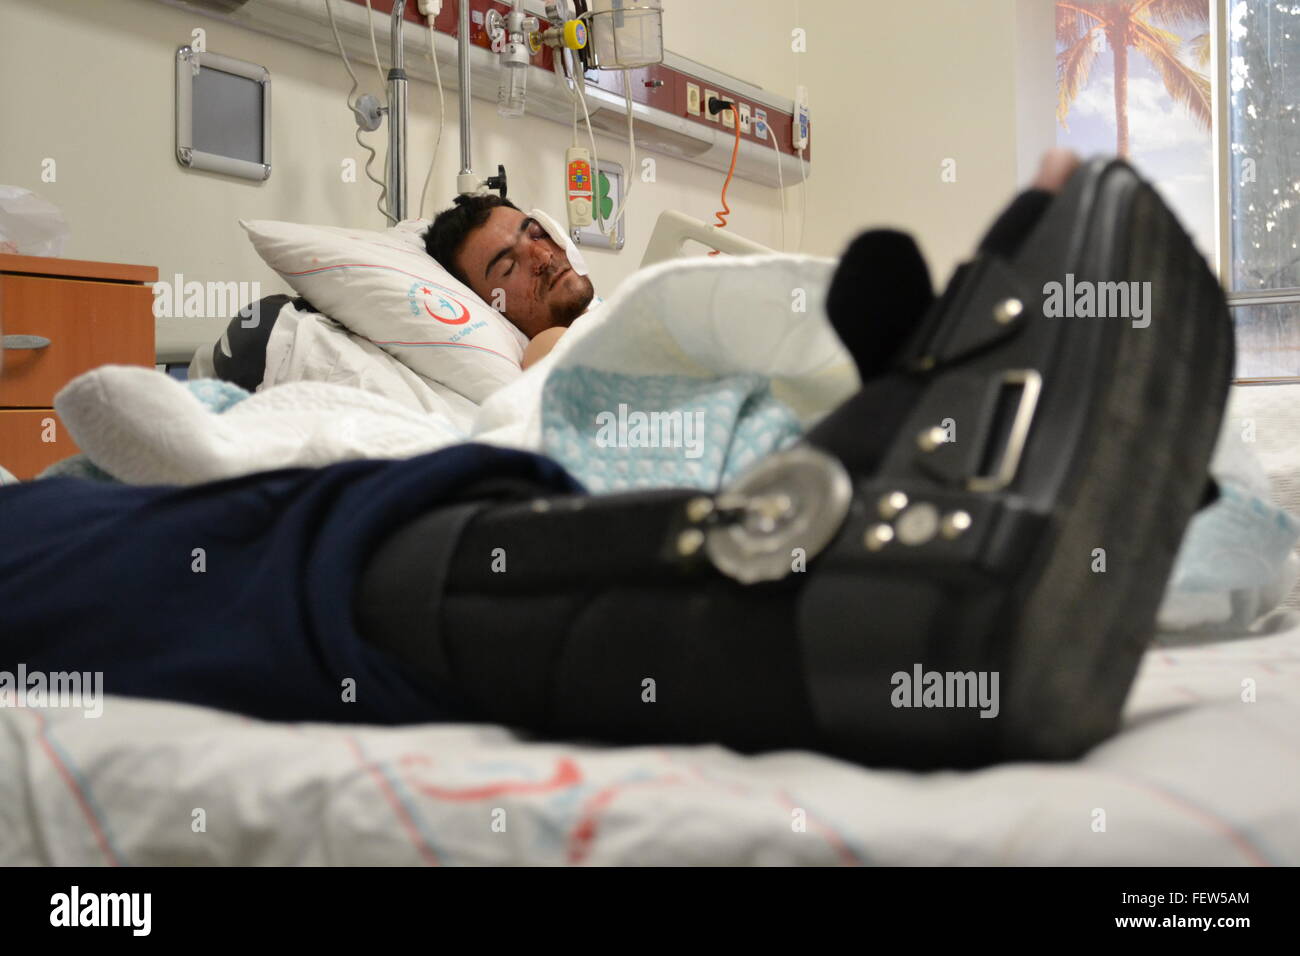 Kasem who has been unconcious for two days after supposedly sustaining injuries in a Russian air strike on the Syrian city Aleppo lies in a hospital in Kilis, Turkey. Photo: Shabtai Gold/dpa Stock Photo